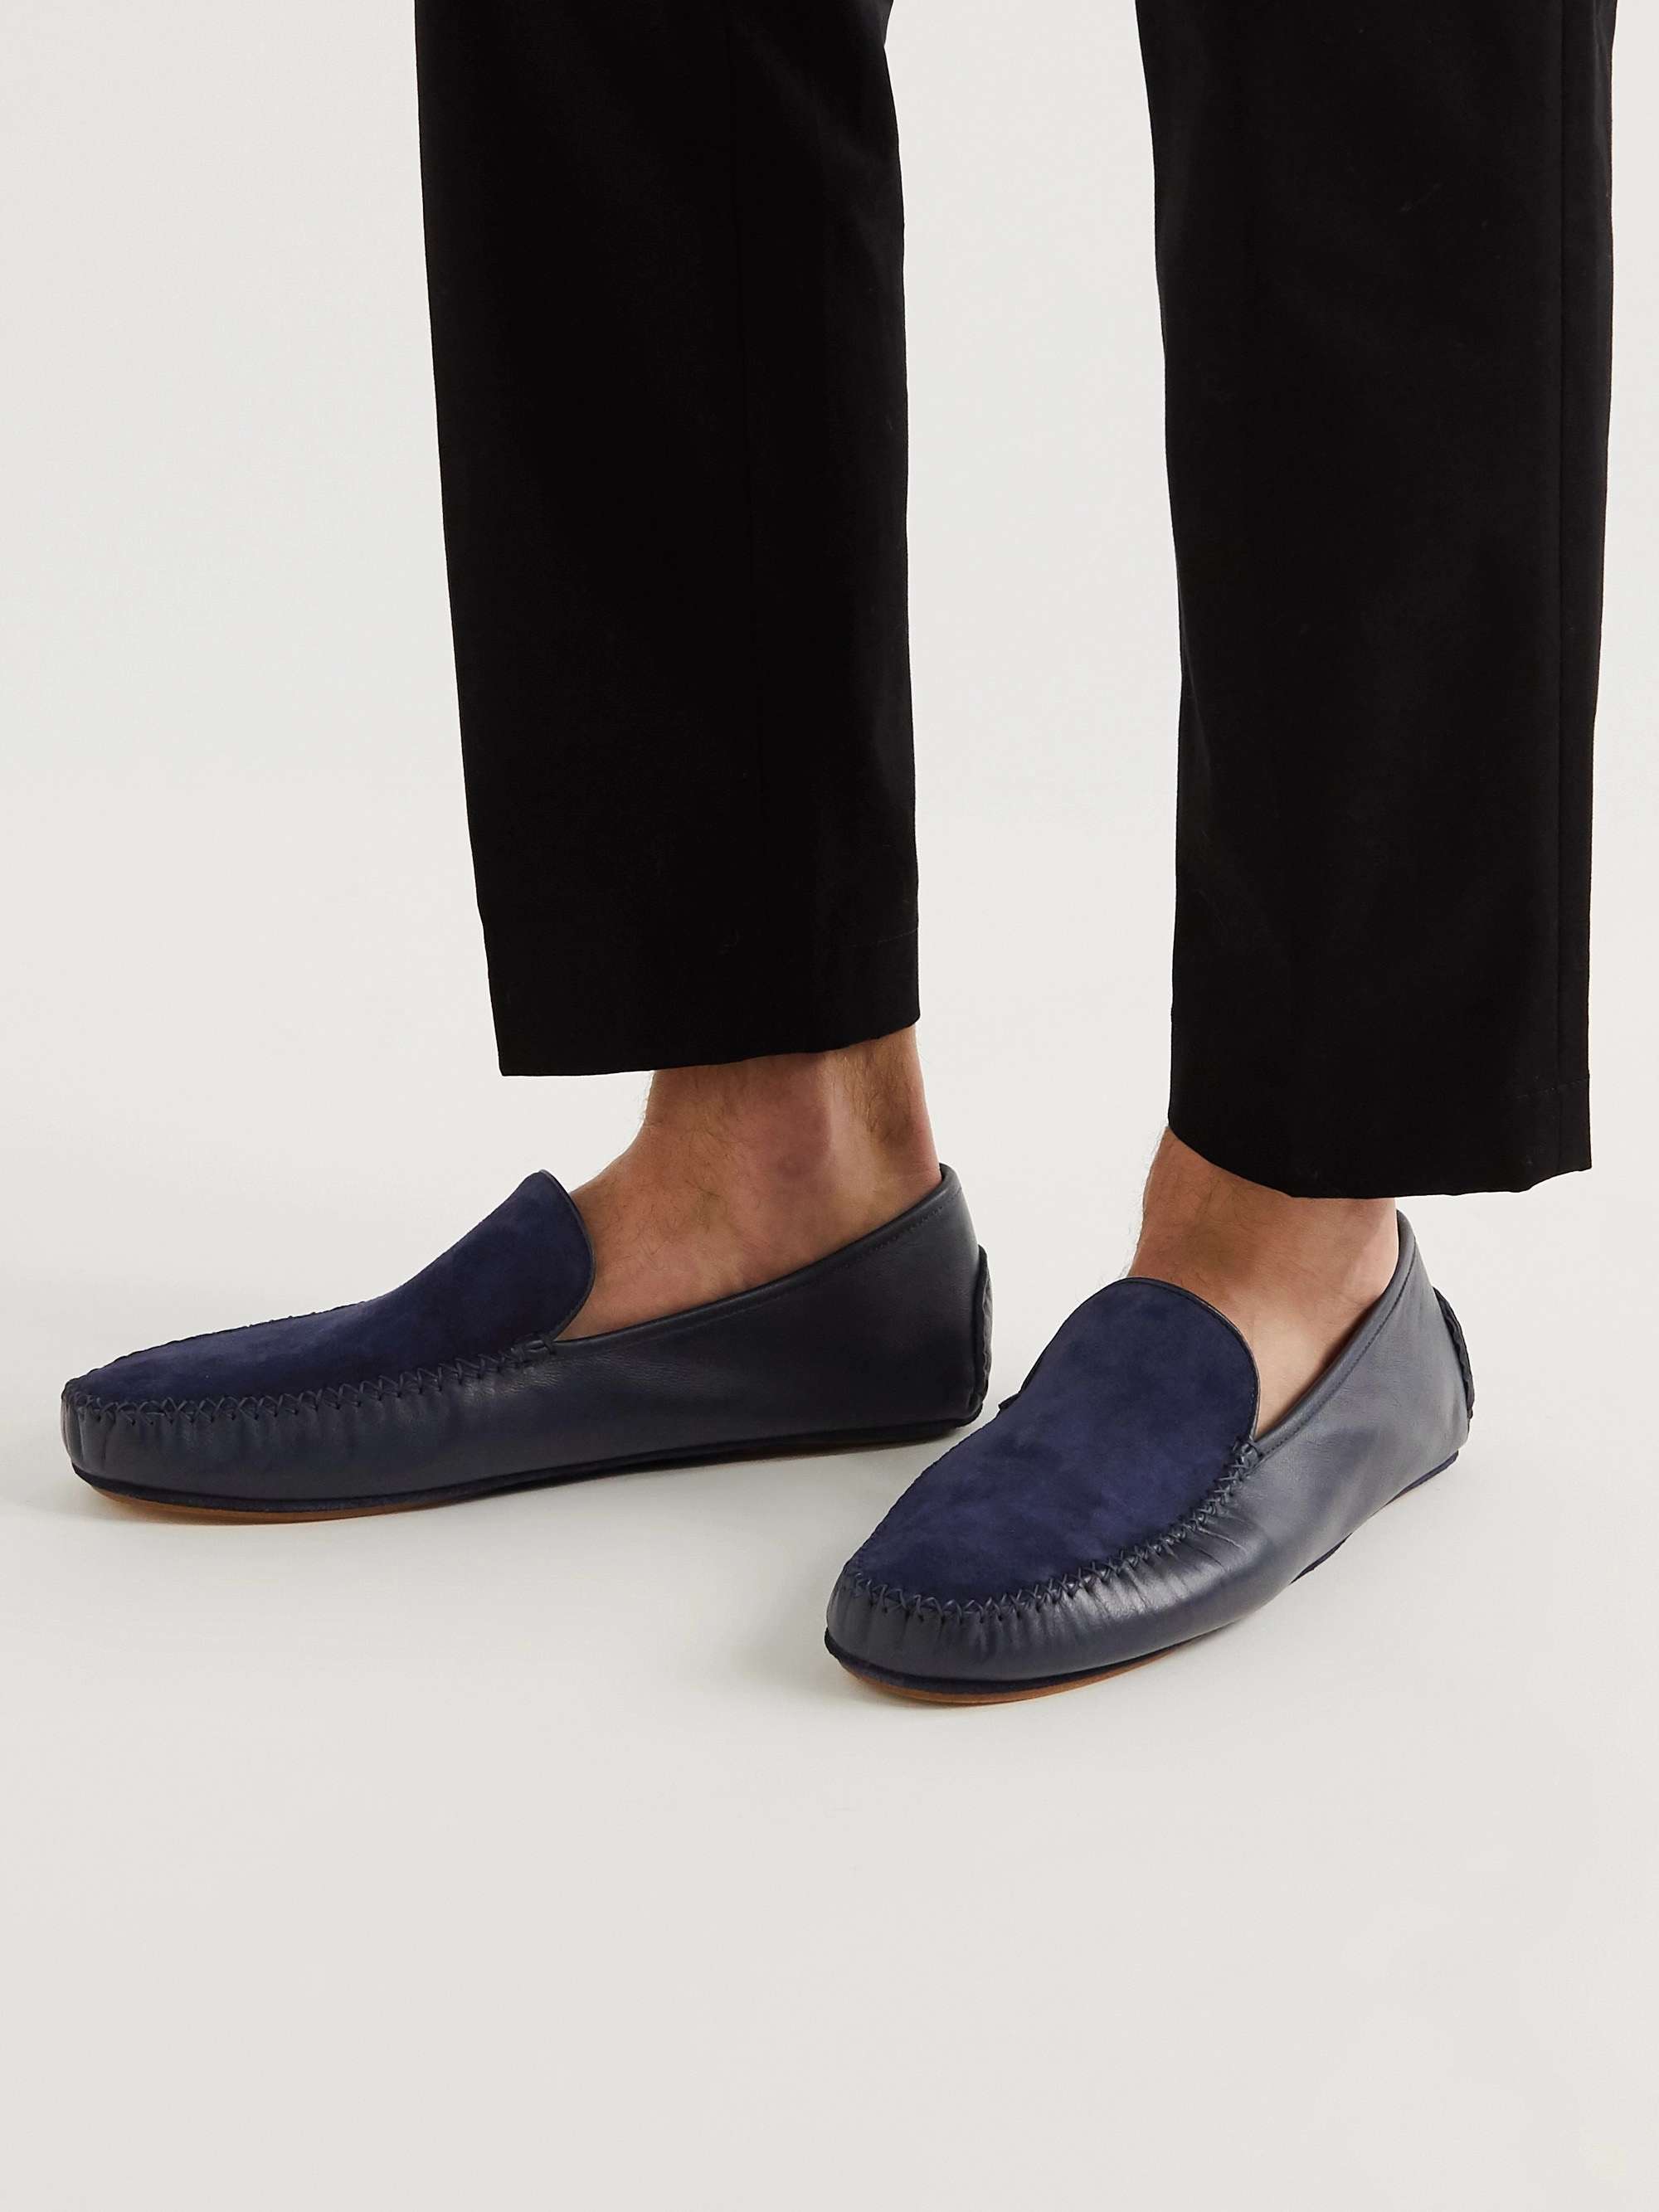 MANOLO BLAHNIK Mayfair Leather and Suede Slippers